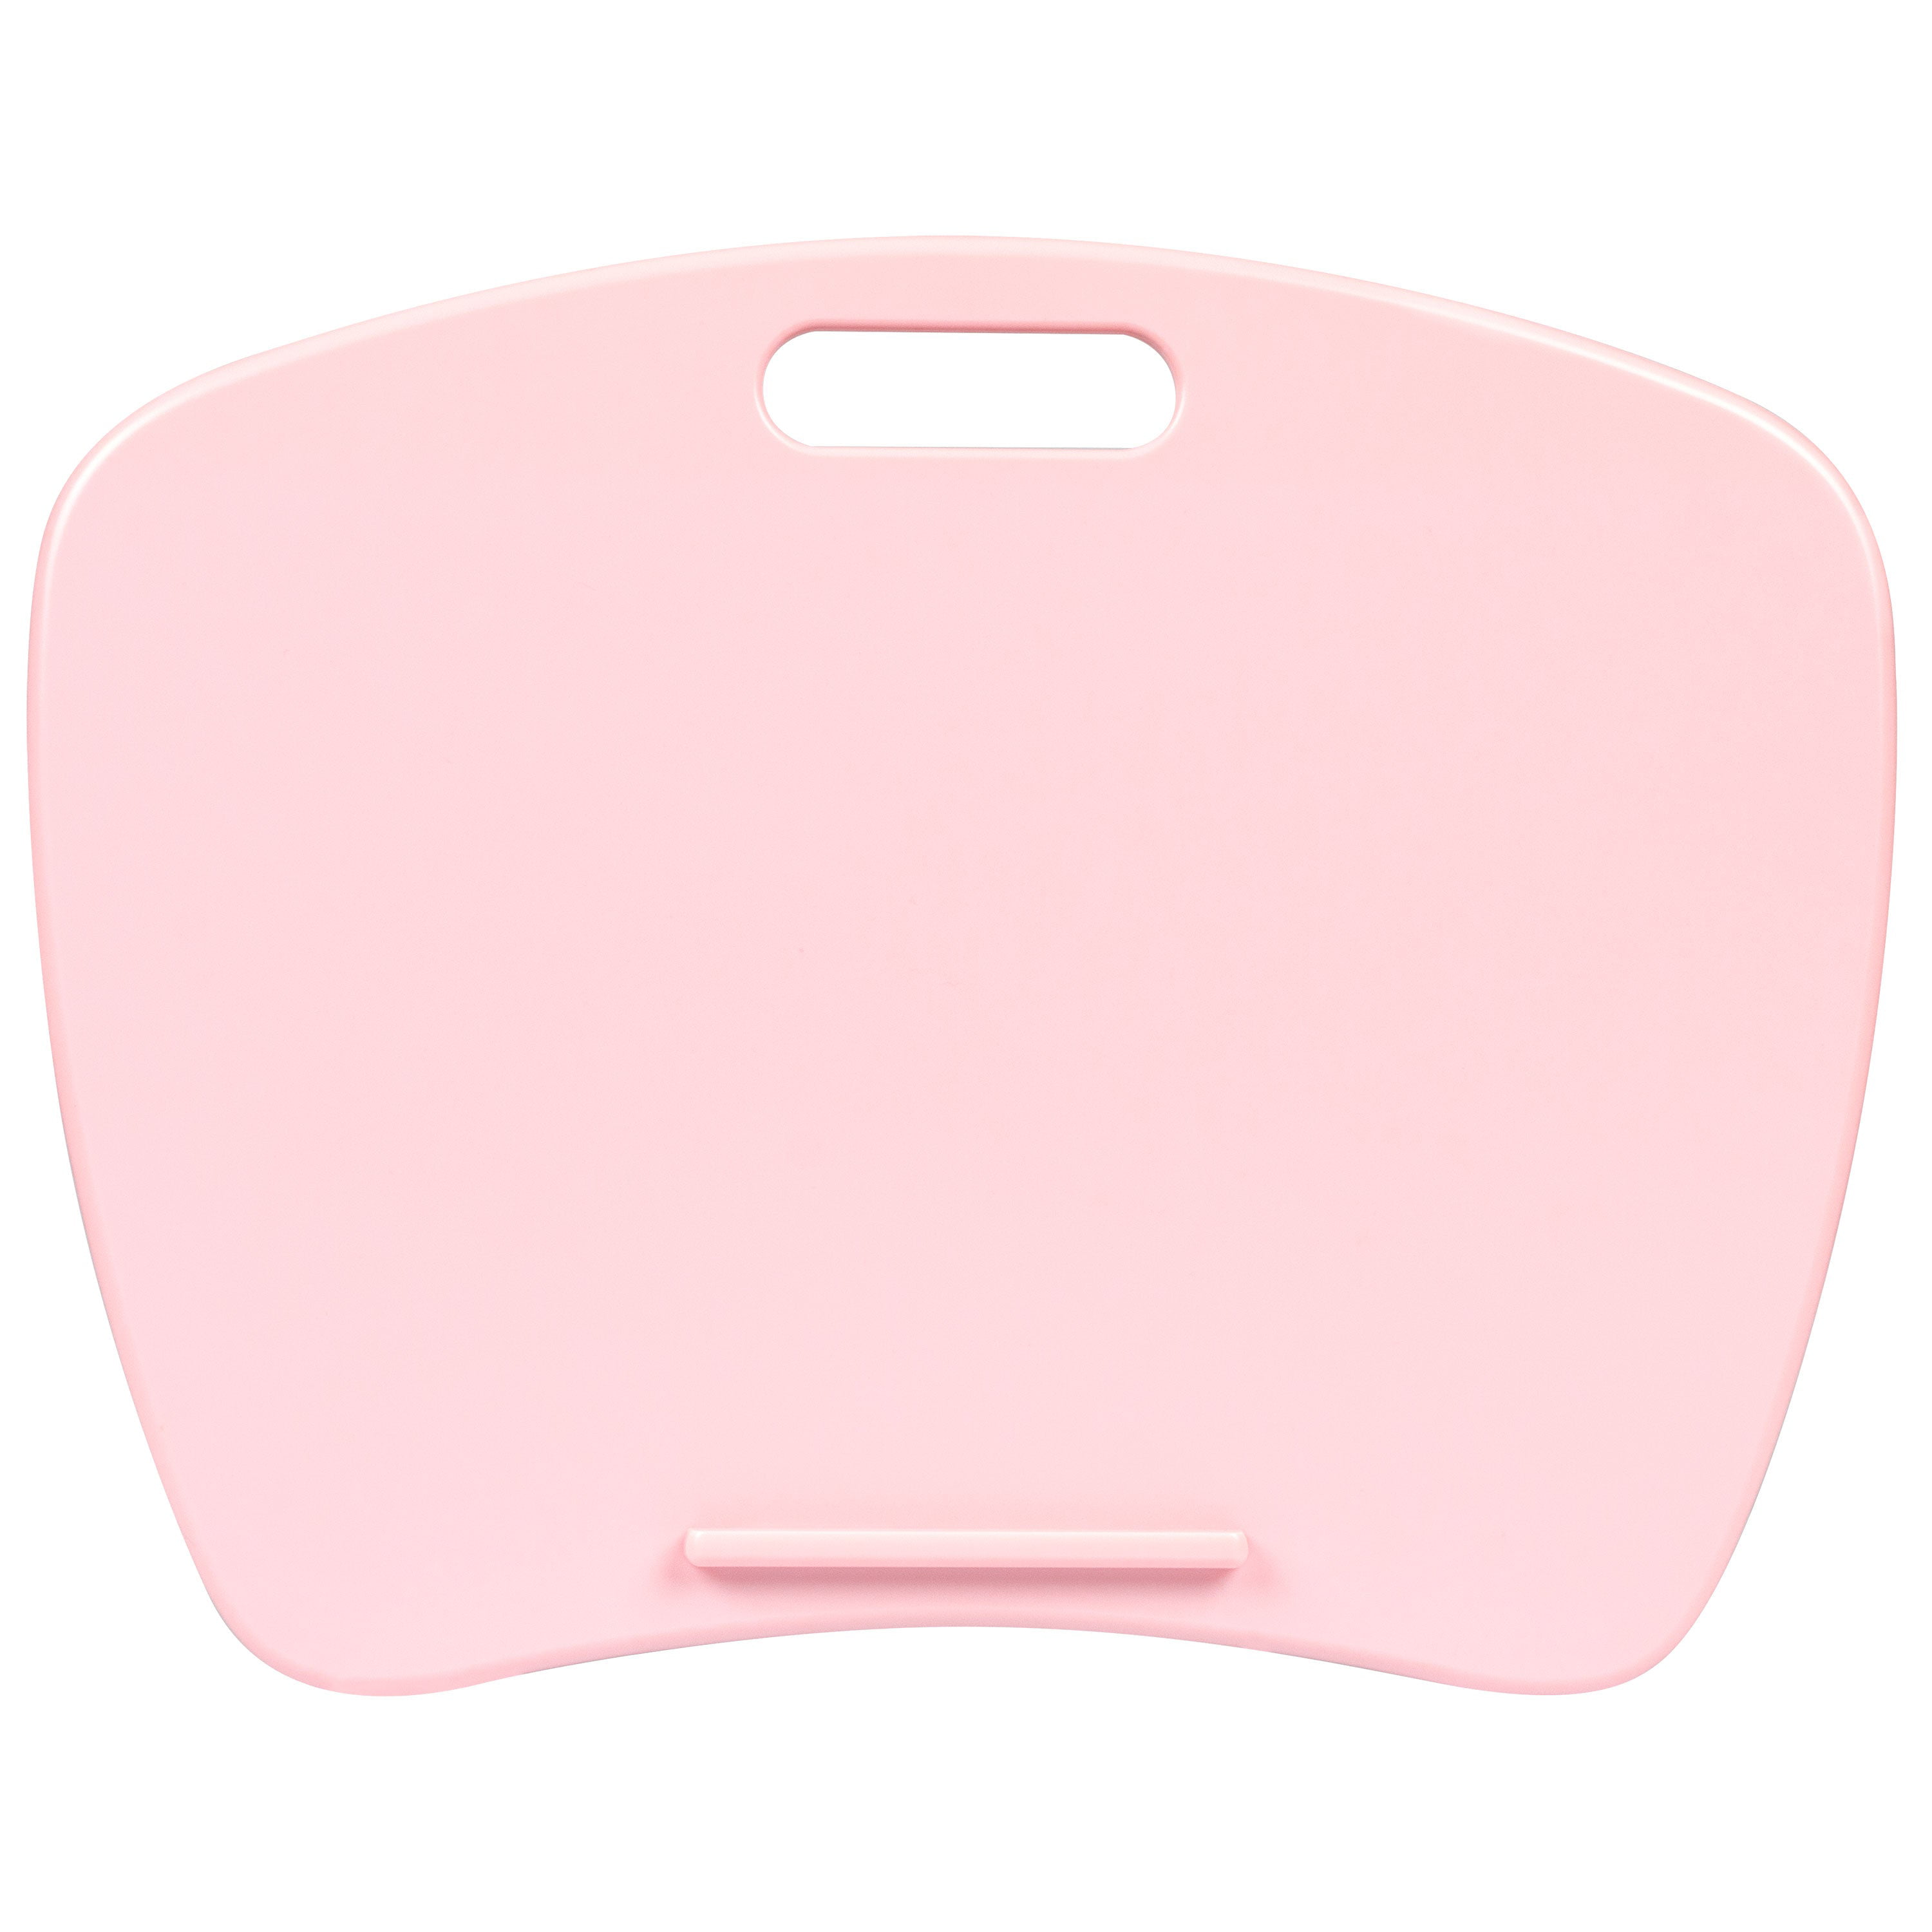 LapGear Lap Pets Pig Tablet Pillow Stand for Most Tablets Up to 10.1 Pink  36118 - Best Buy